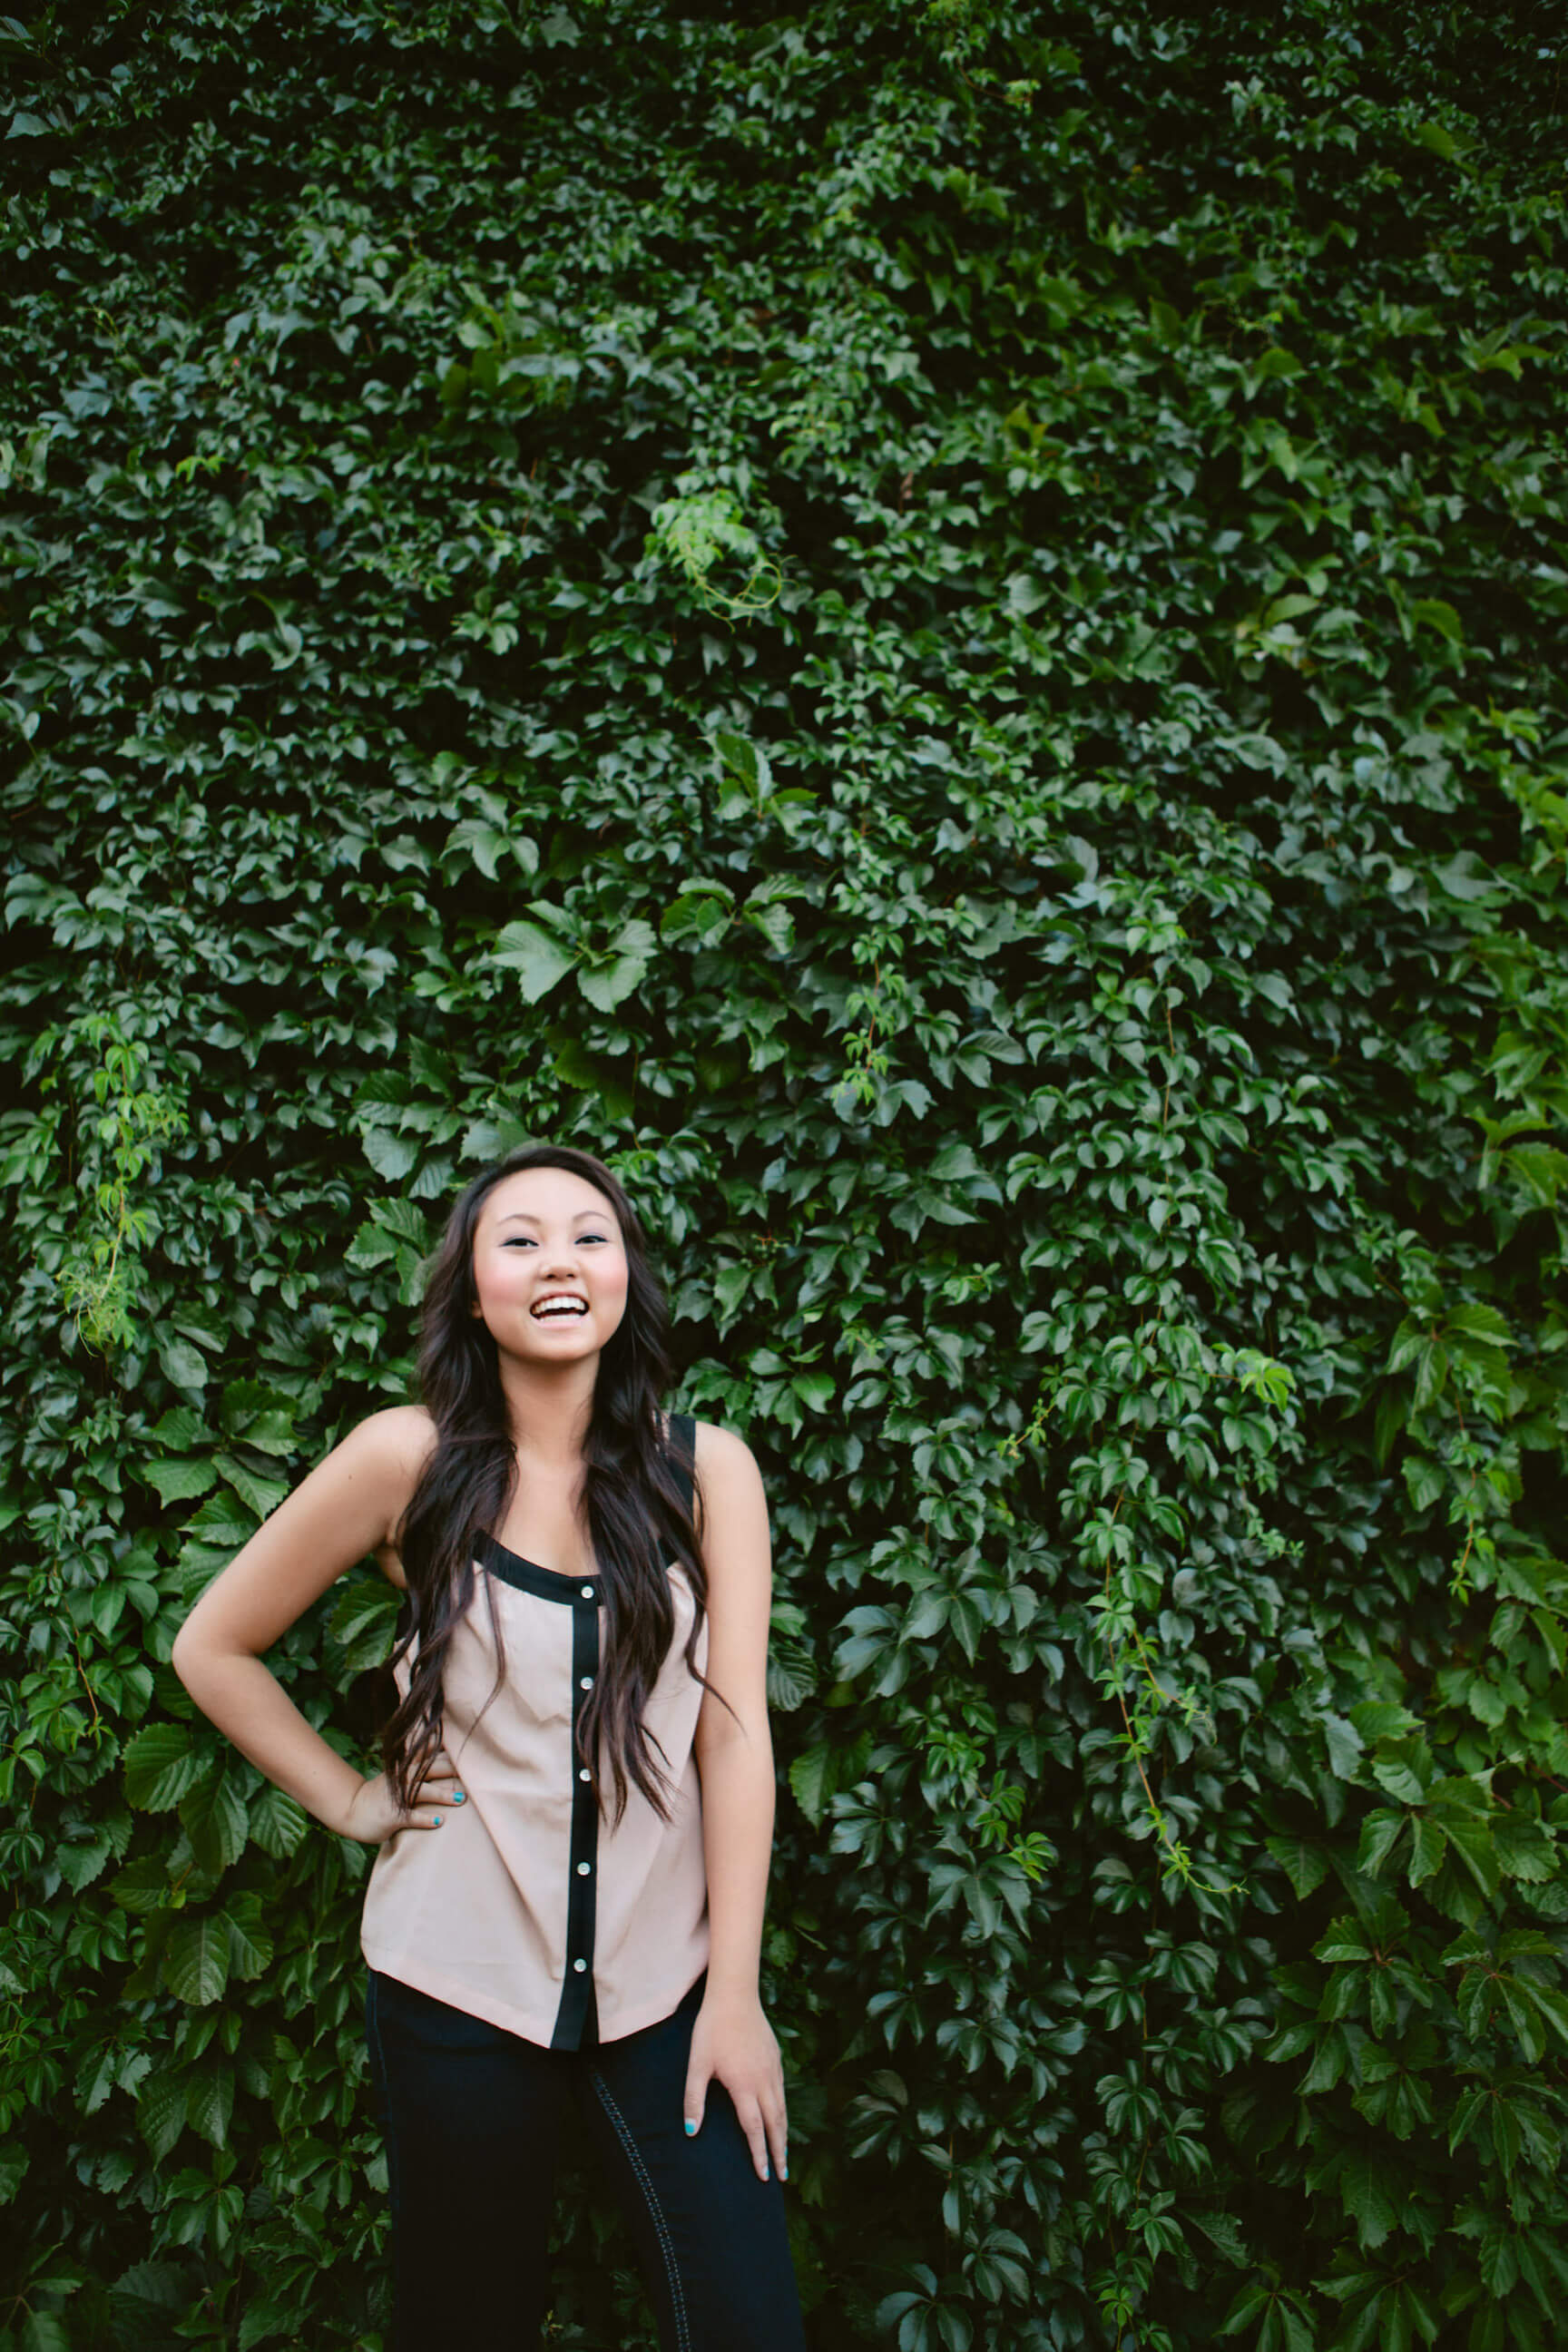 A senior girl laughs against a wall of green leaves during her senior portraits in Missoula Montana